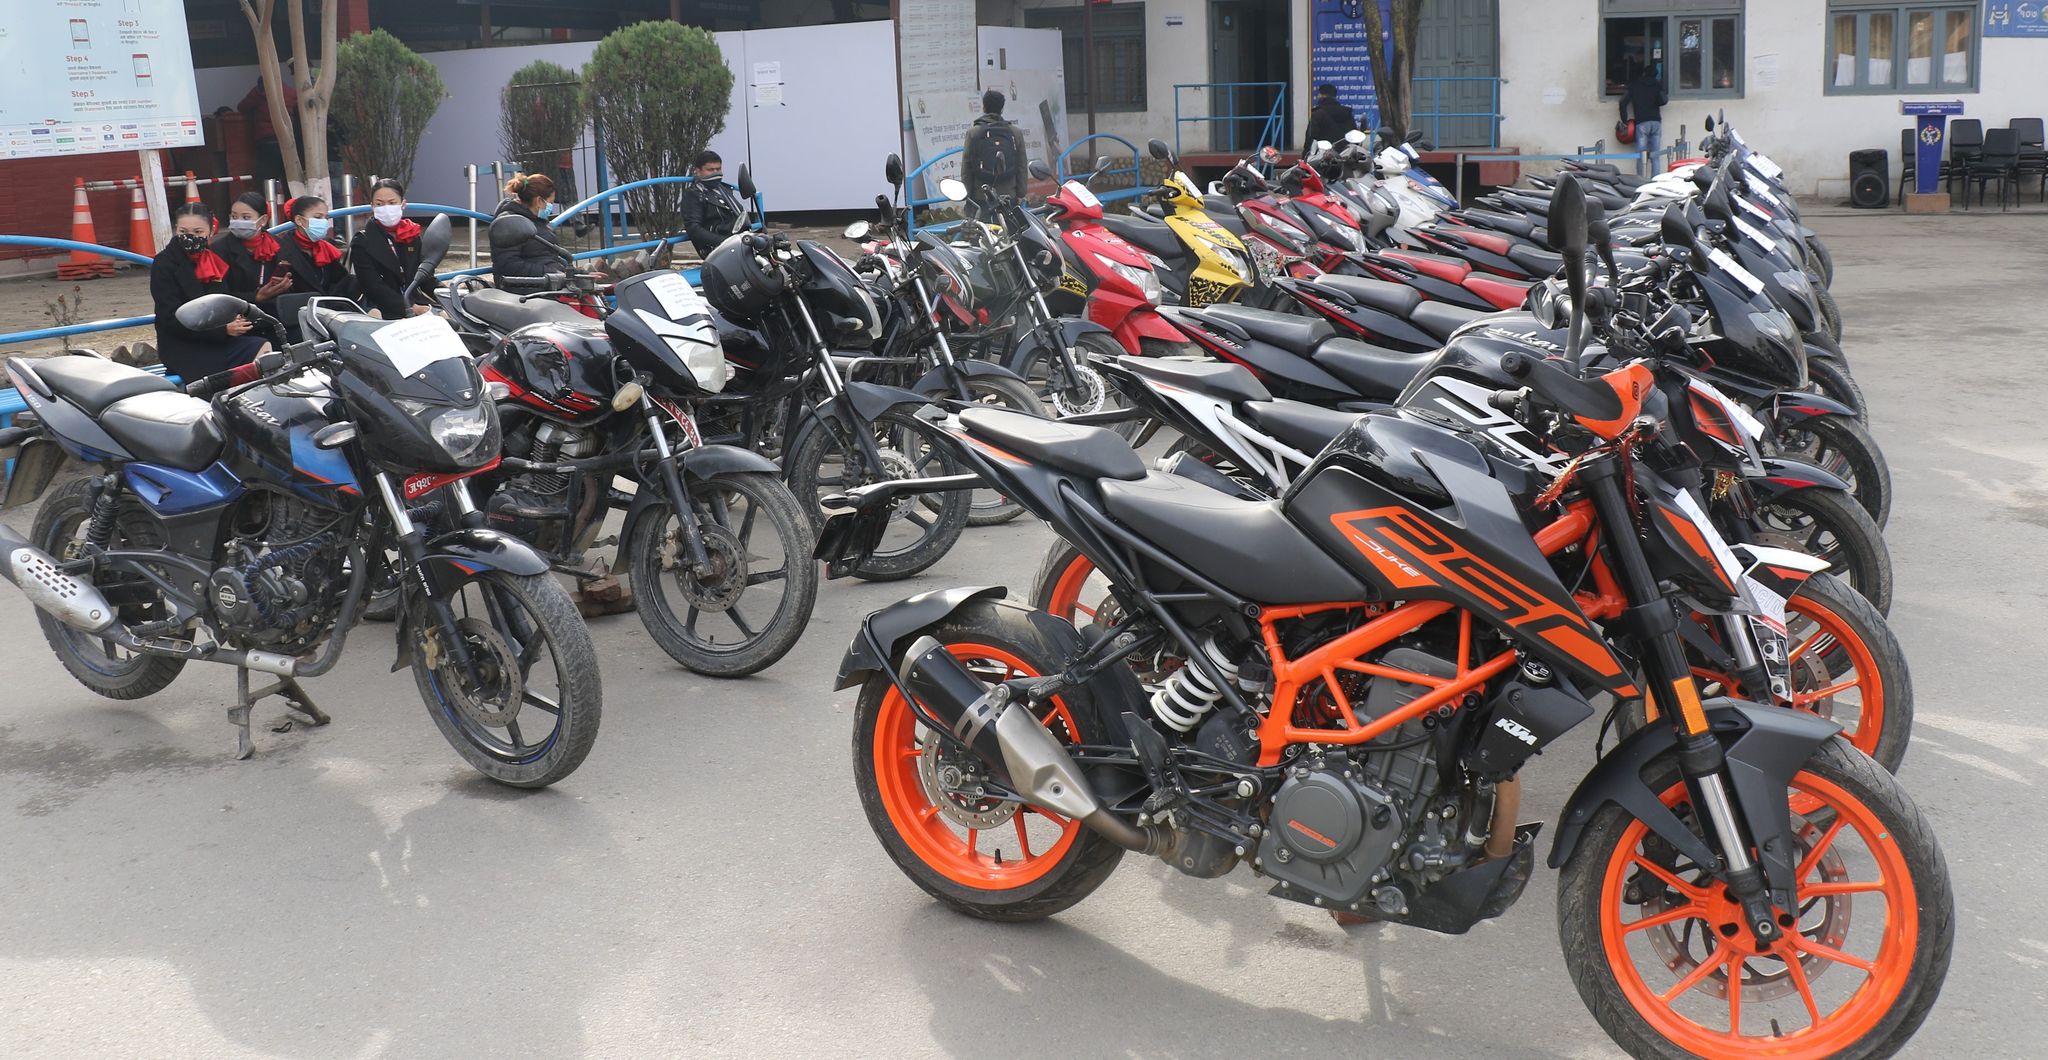 26 stolen motorcycles handed over to rich